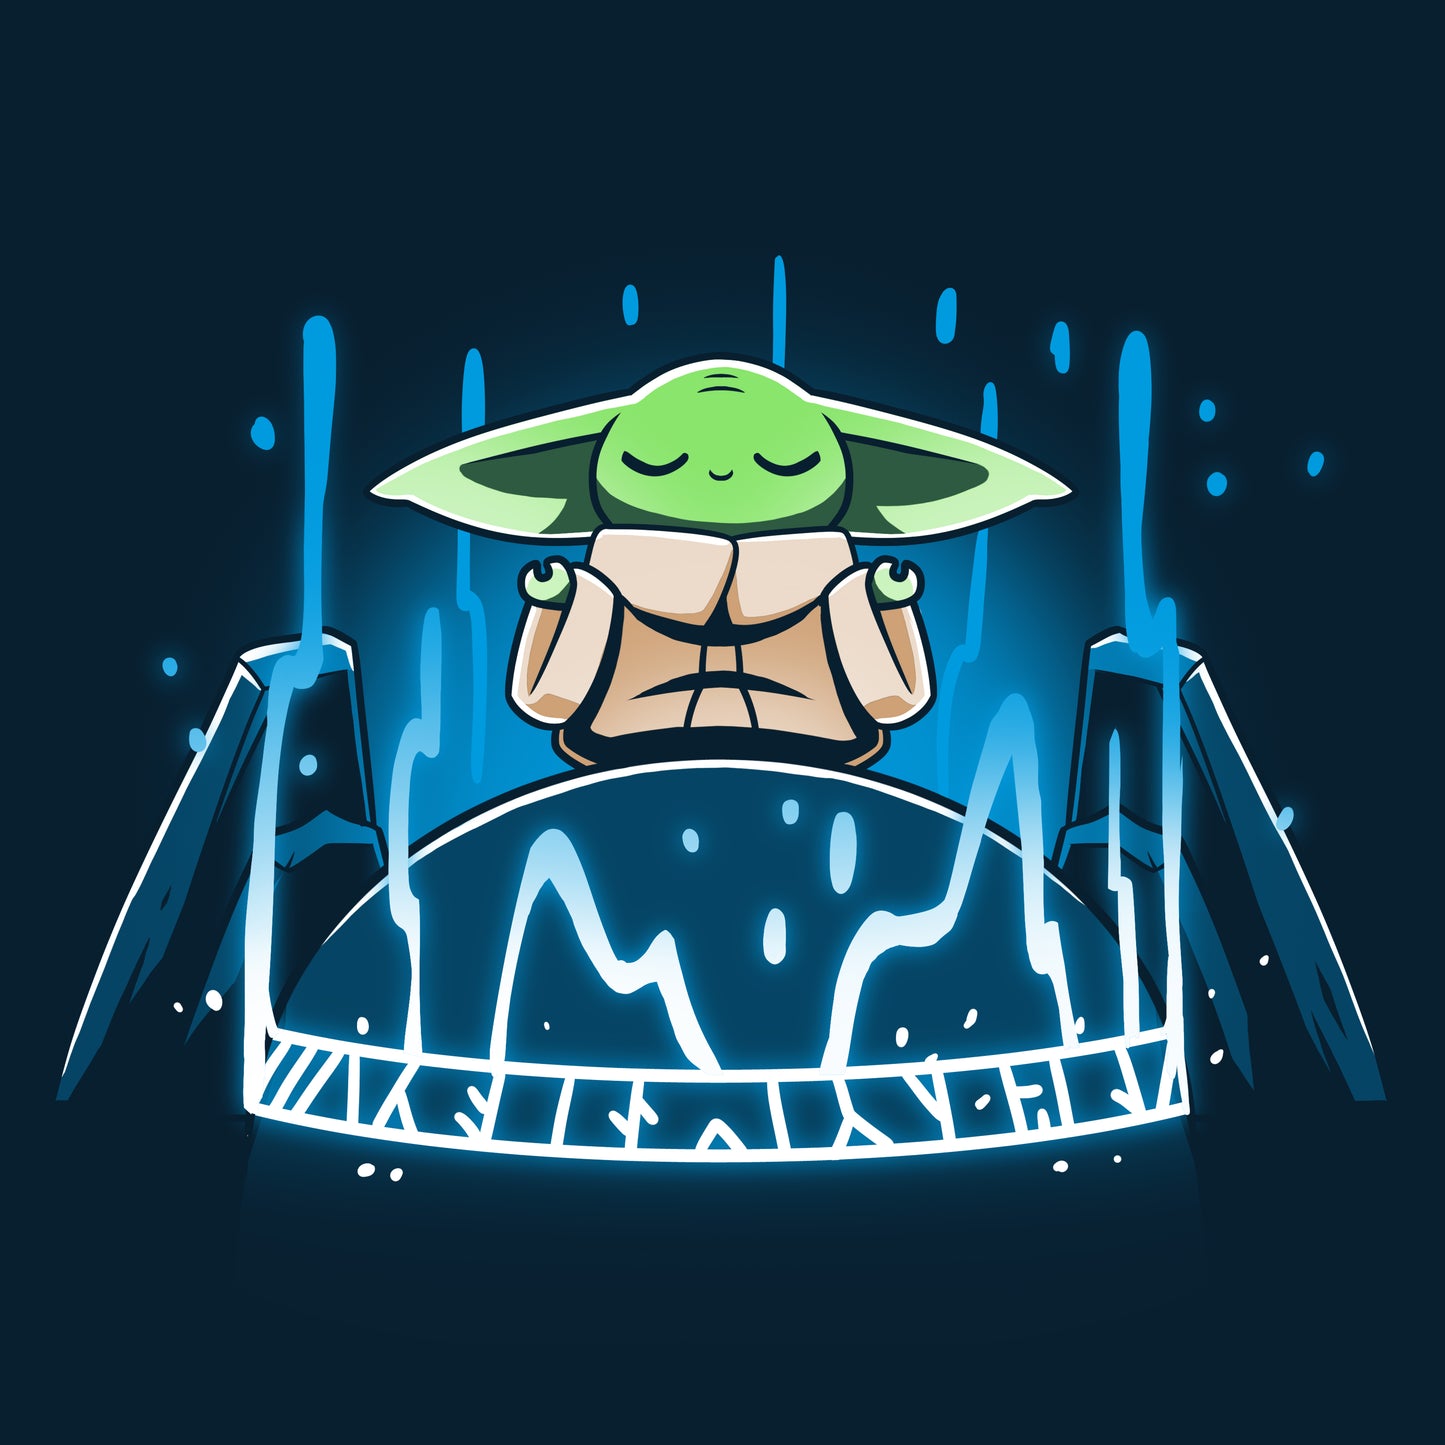 The Seeing Stone by Star Wars, depicting Baby Yoda meditating on a blue background, available in men's and women's t-shirt.